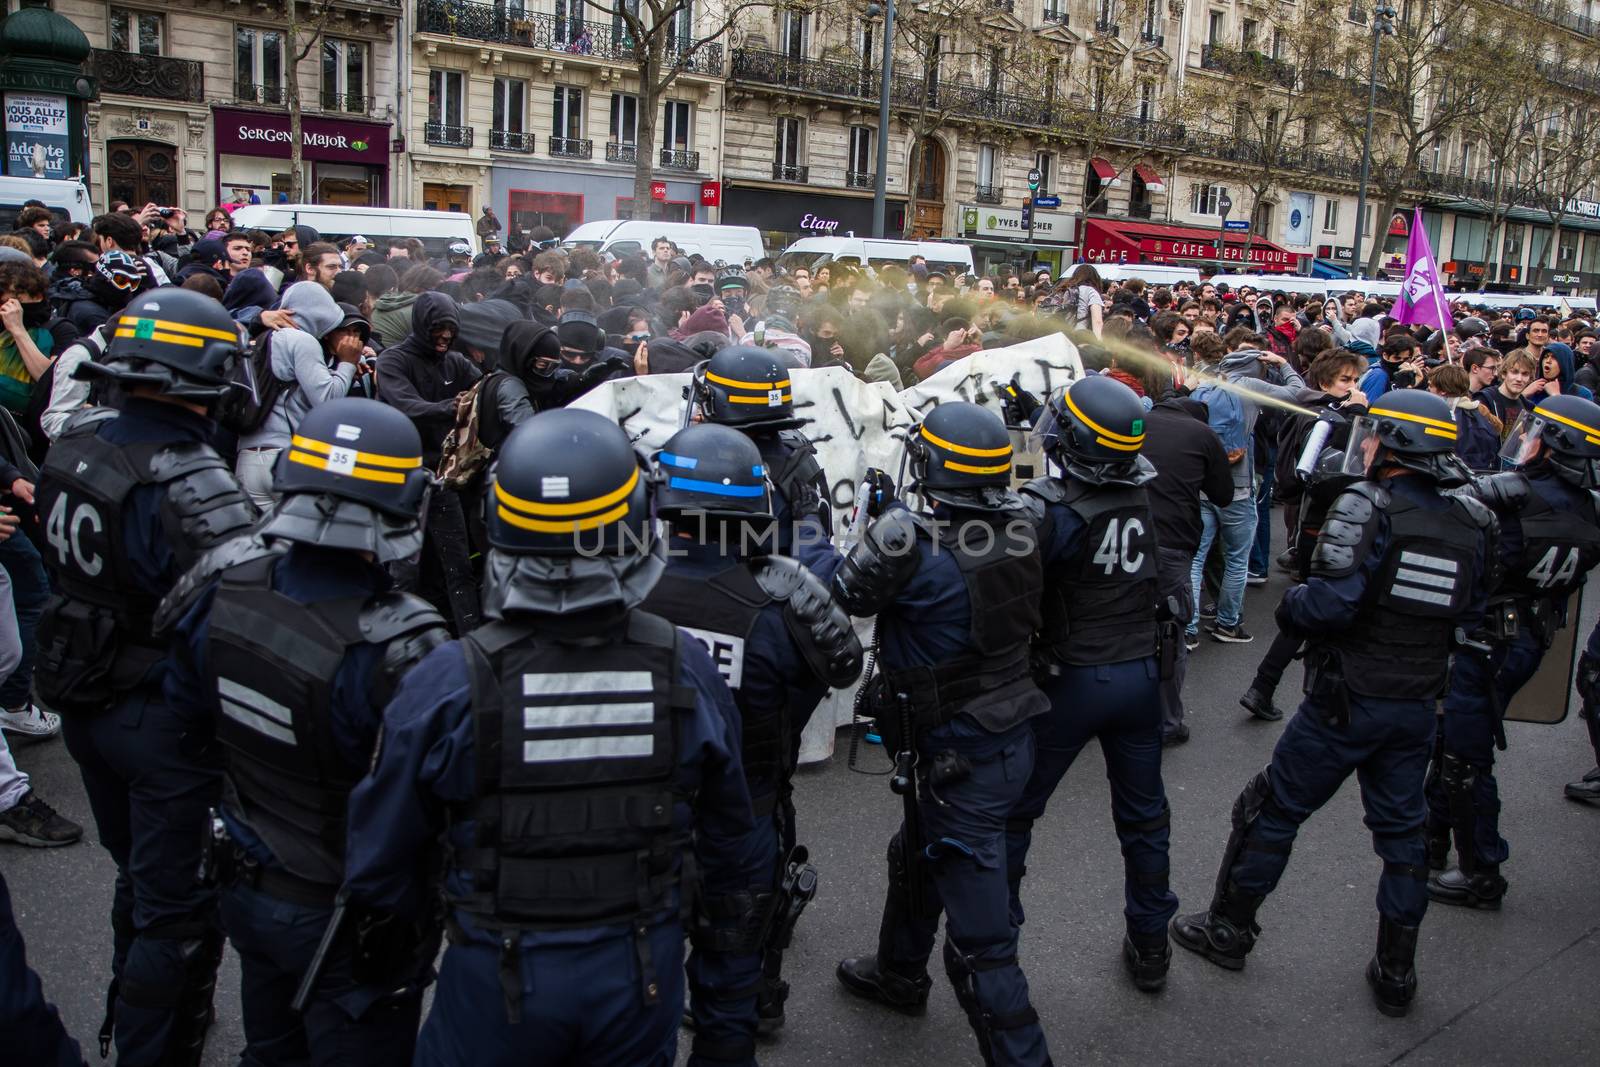 FRANCE, Paris: Riot policemen throw tear gas at a crowd of protesters as hundreds demonstrate against the French government's proposed labour law reforms on April 14, 2016 in Paris. Fresh strikes by unions and students are being held across France against proposed reforms to France's labour laws, heaping pressure on President Francois Hollande who suffered a major defeat over constitutional reforms on March 30.